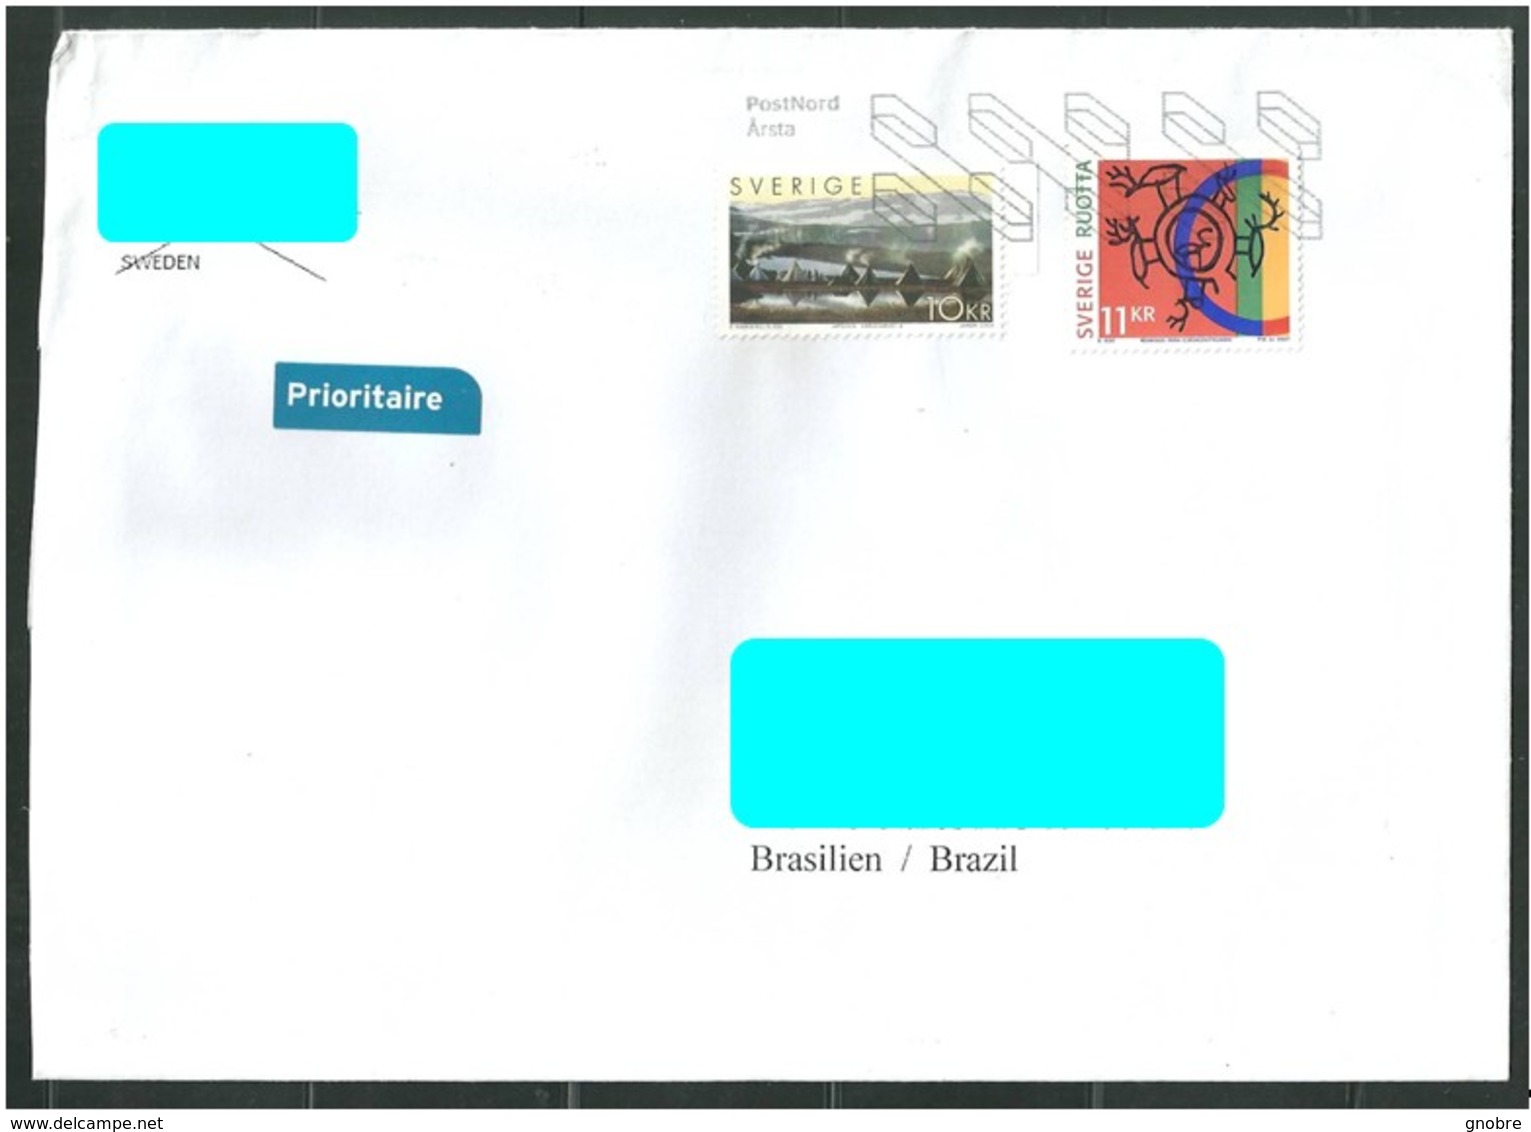 SWEDEN To Brazil Cover Sent In 2018? With 2 Topical Stamps And Beautiful Cancel Mark (GN 0117). - Briefe U. Dokumente